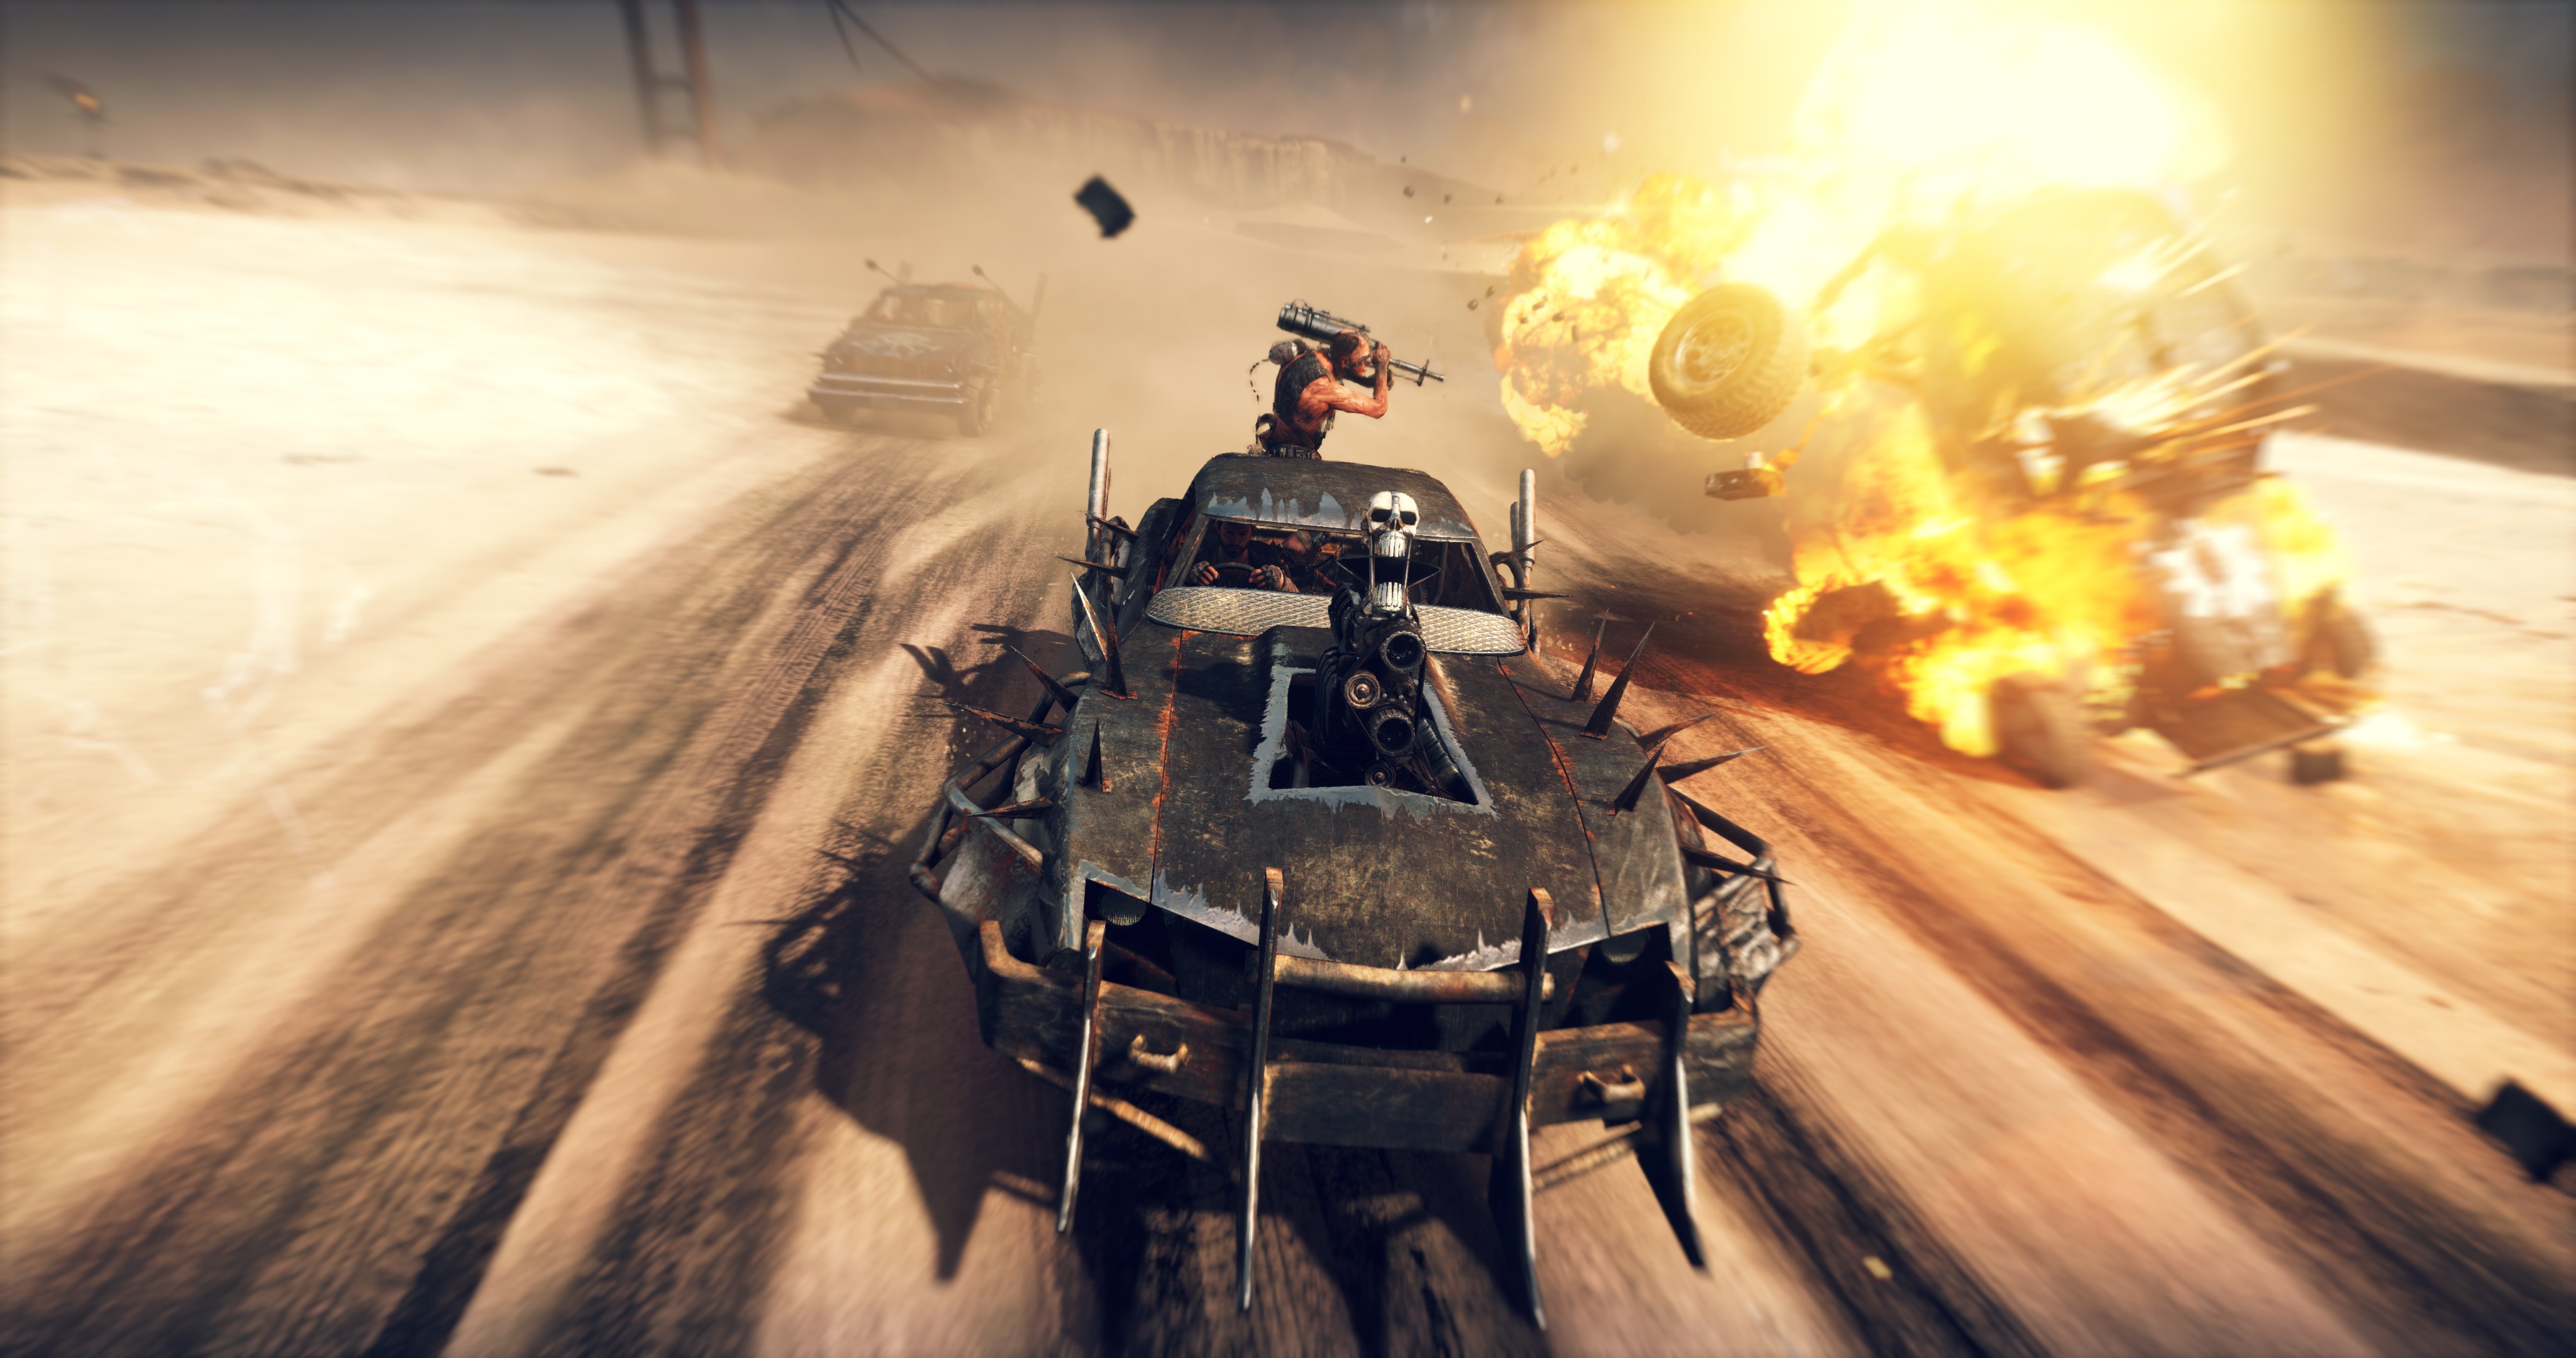 mad max game wallpaper,action adventure game,strategy video game,pc game,shooter game,games